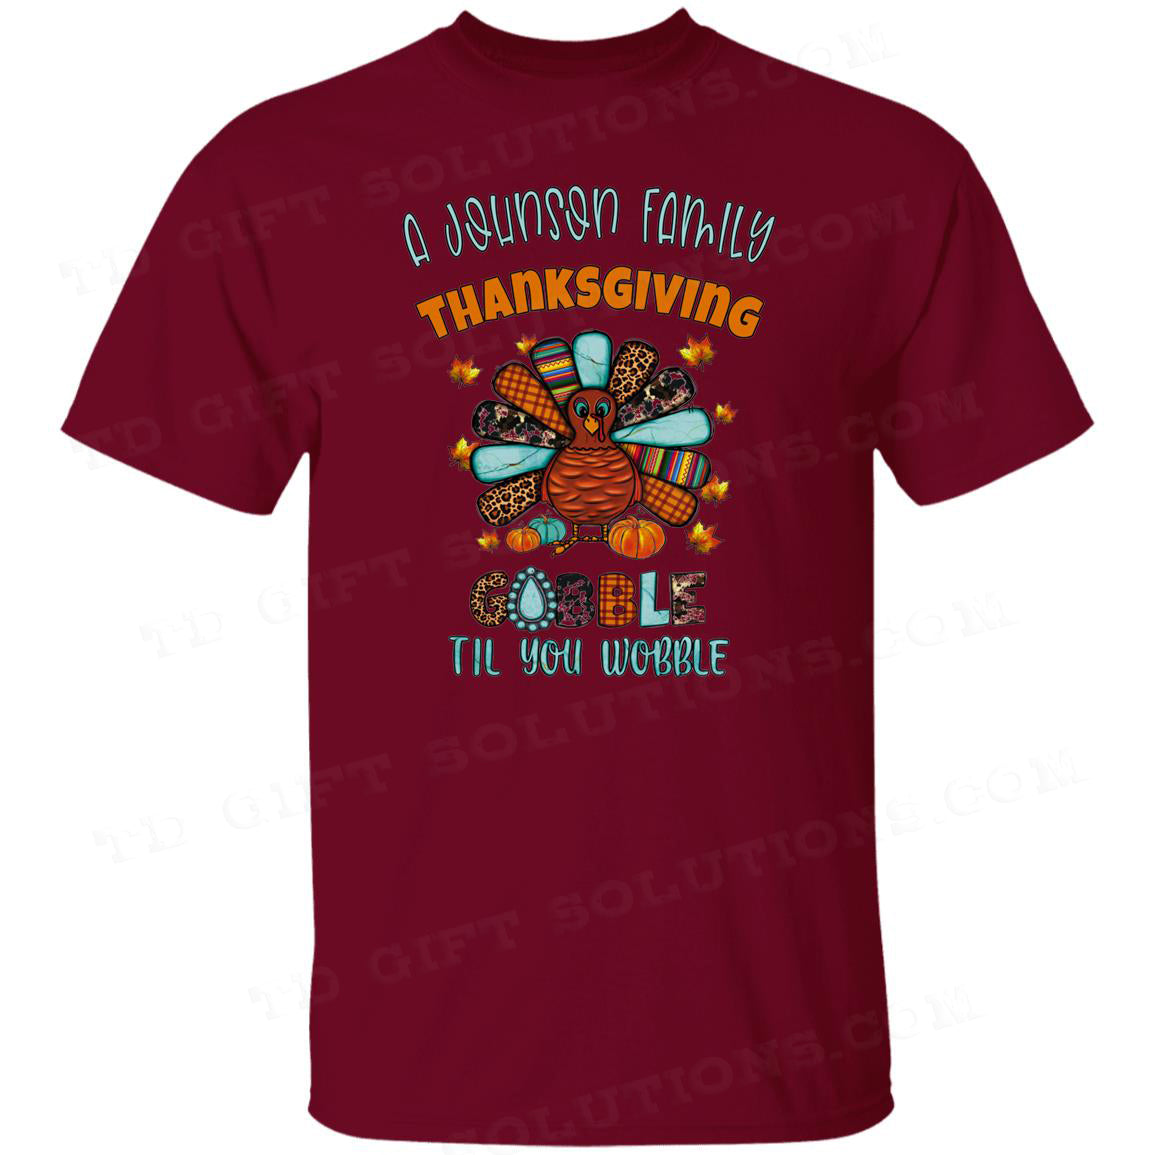 Personalized Matching Thanksgiving Family T-Shirts-TD Gift Solutions.com